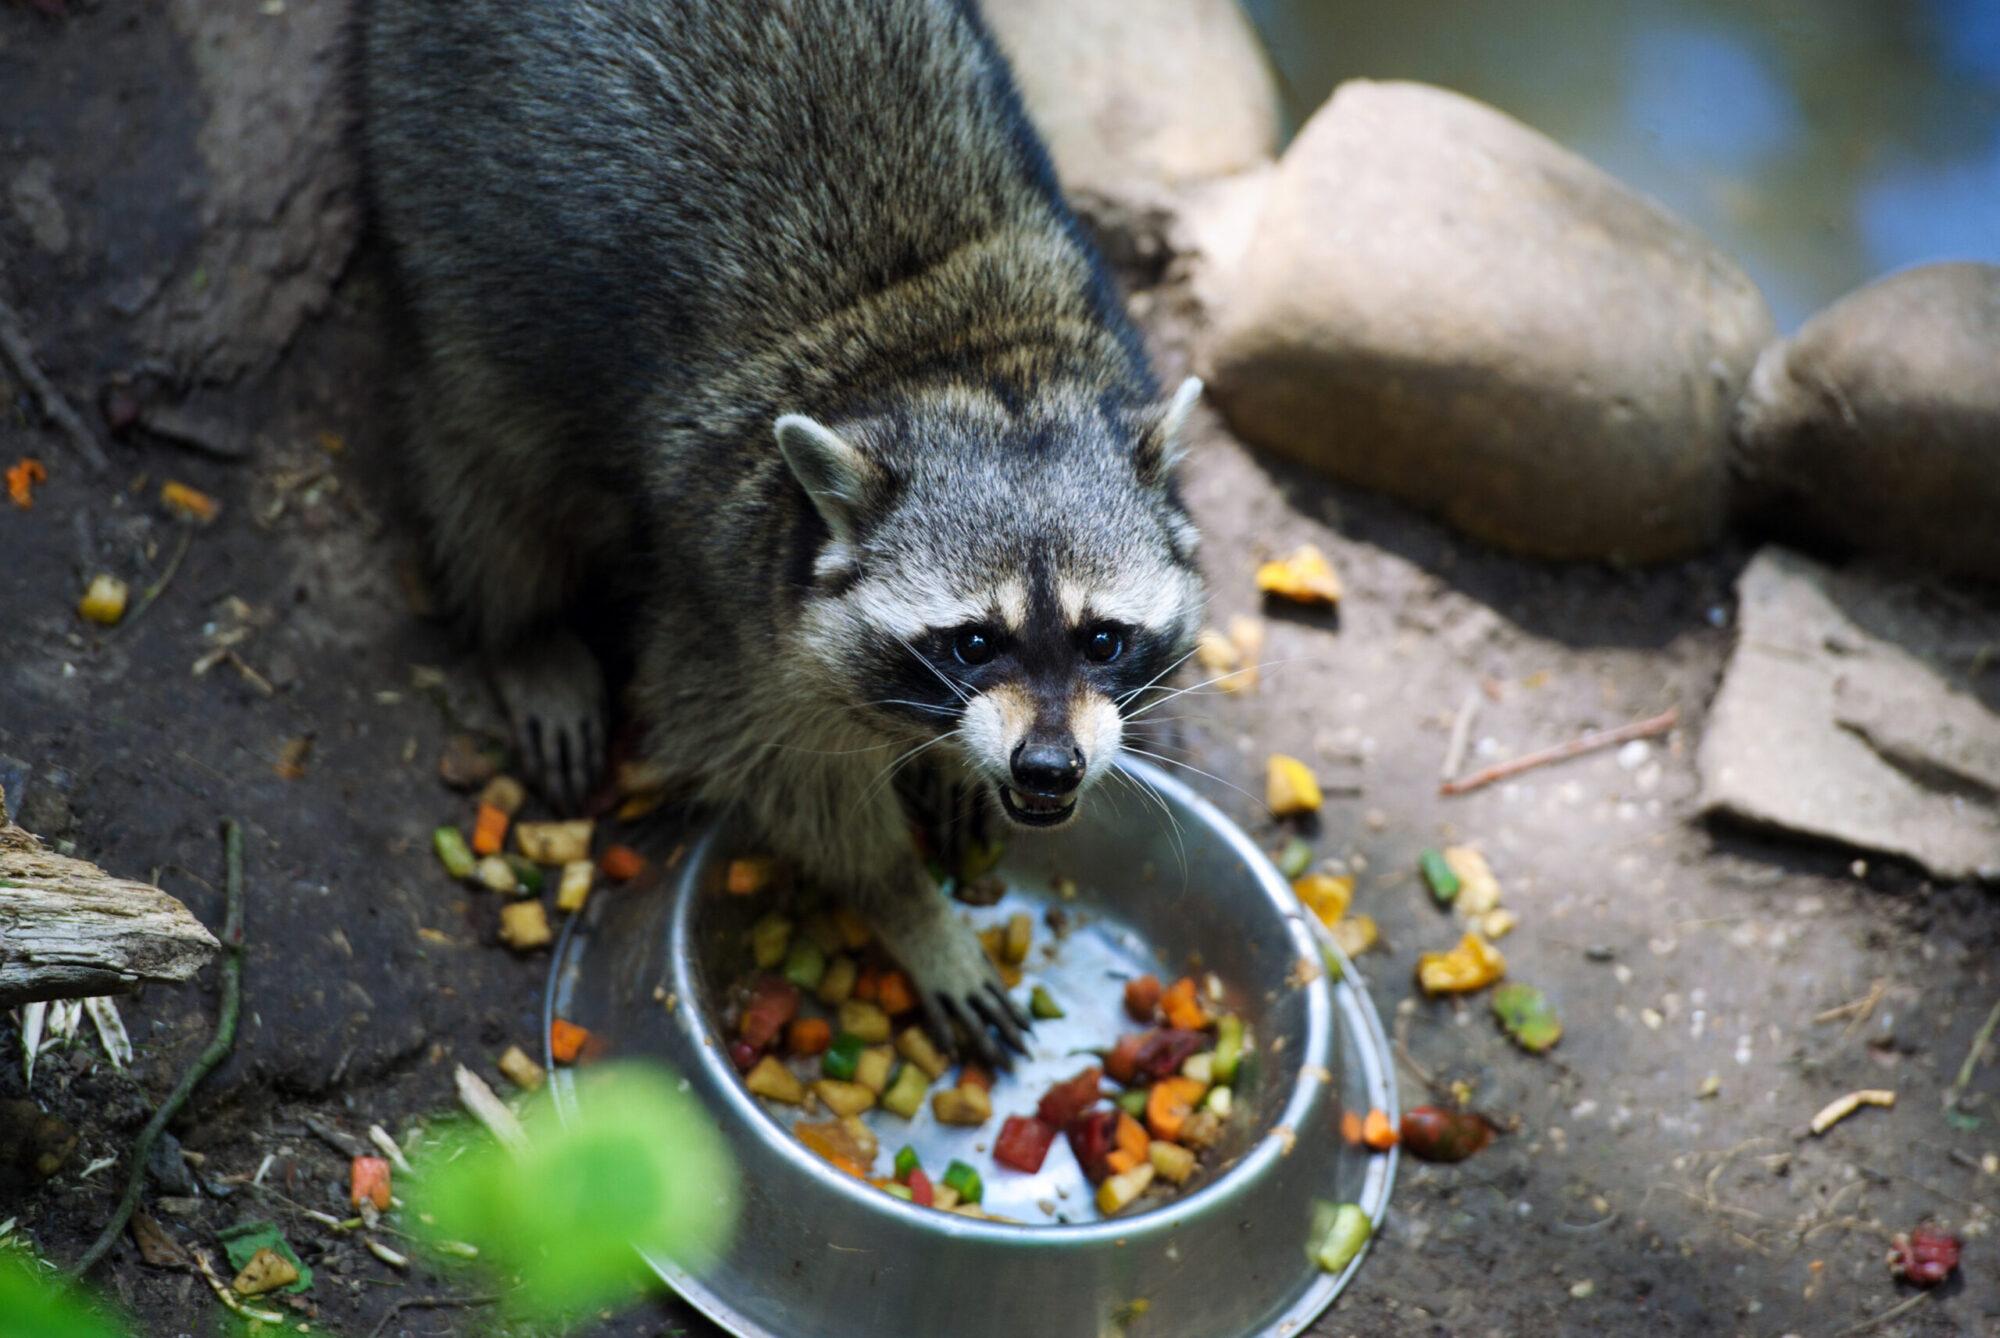 How to deter raccoons | How to get rid of raccoons | Elite Wildlife Services